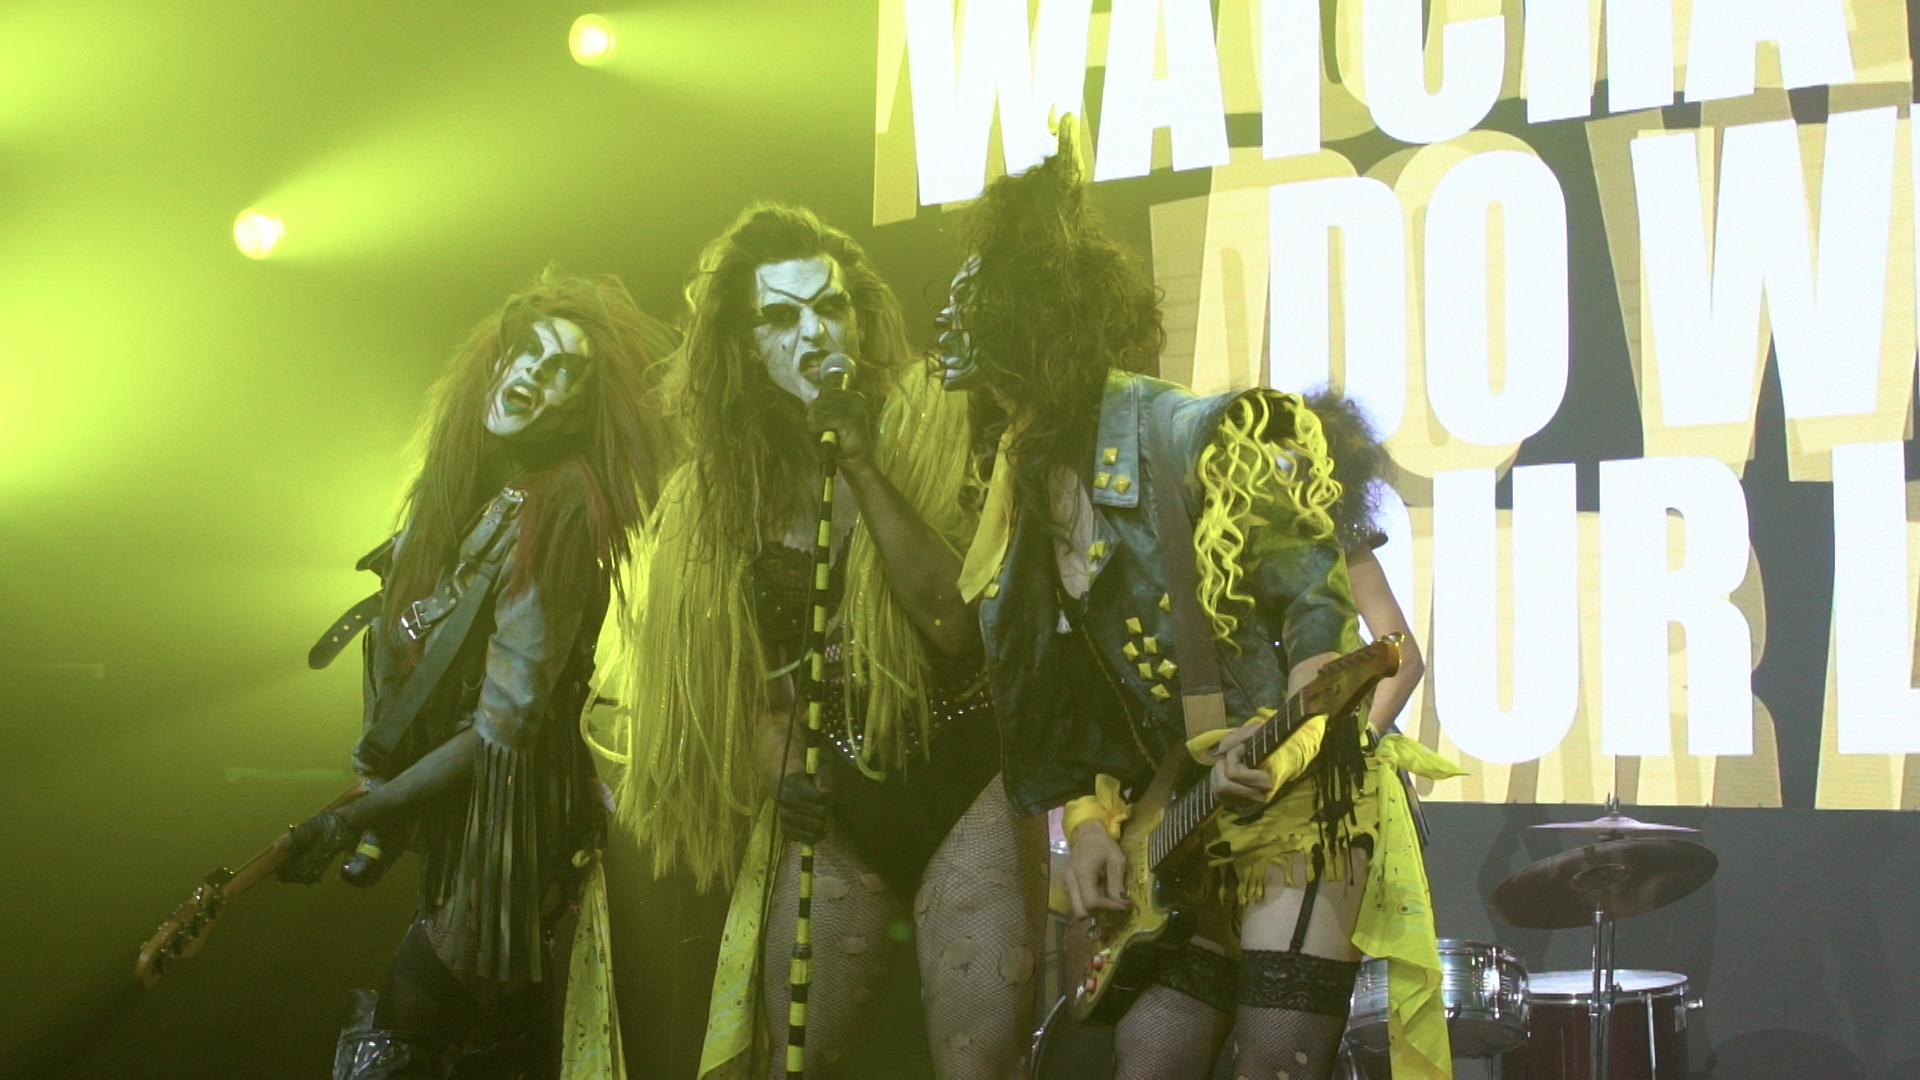 Drag Monsters of Rock, After a harrowing experience, the remaining monsters are split into two teams to compete in the inaugural, "Boulet Brothers' Dragula Monsters of Rock Show"., TV-MA, Season 1053347, Episode 3